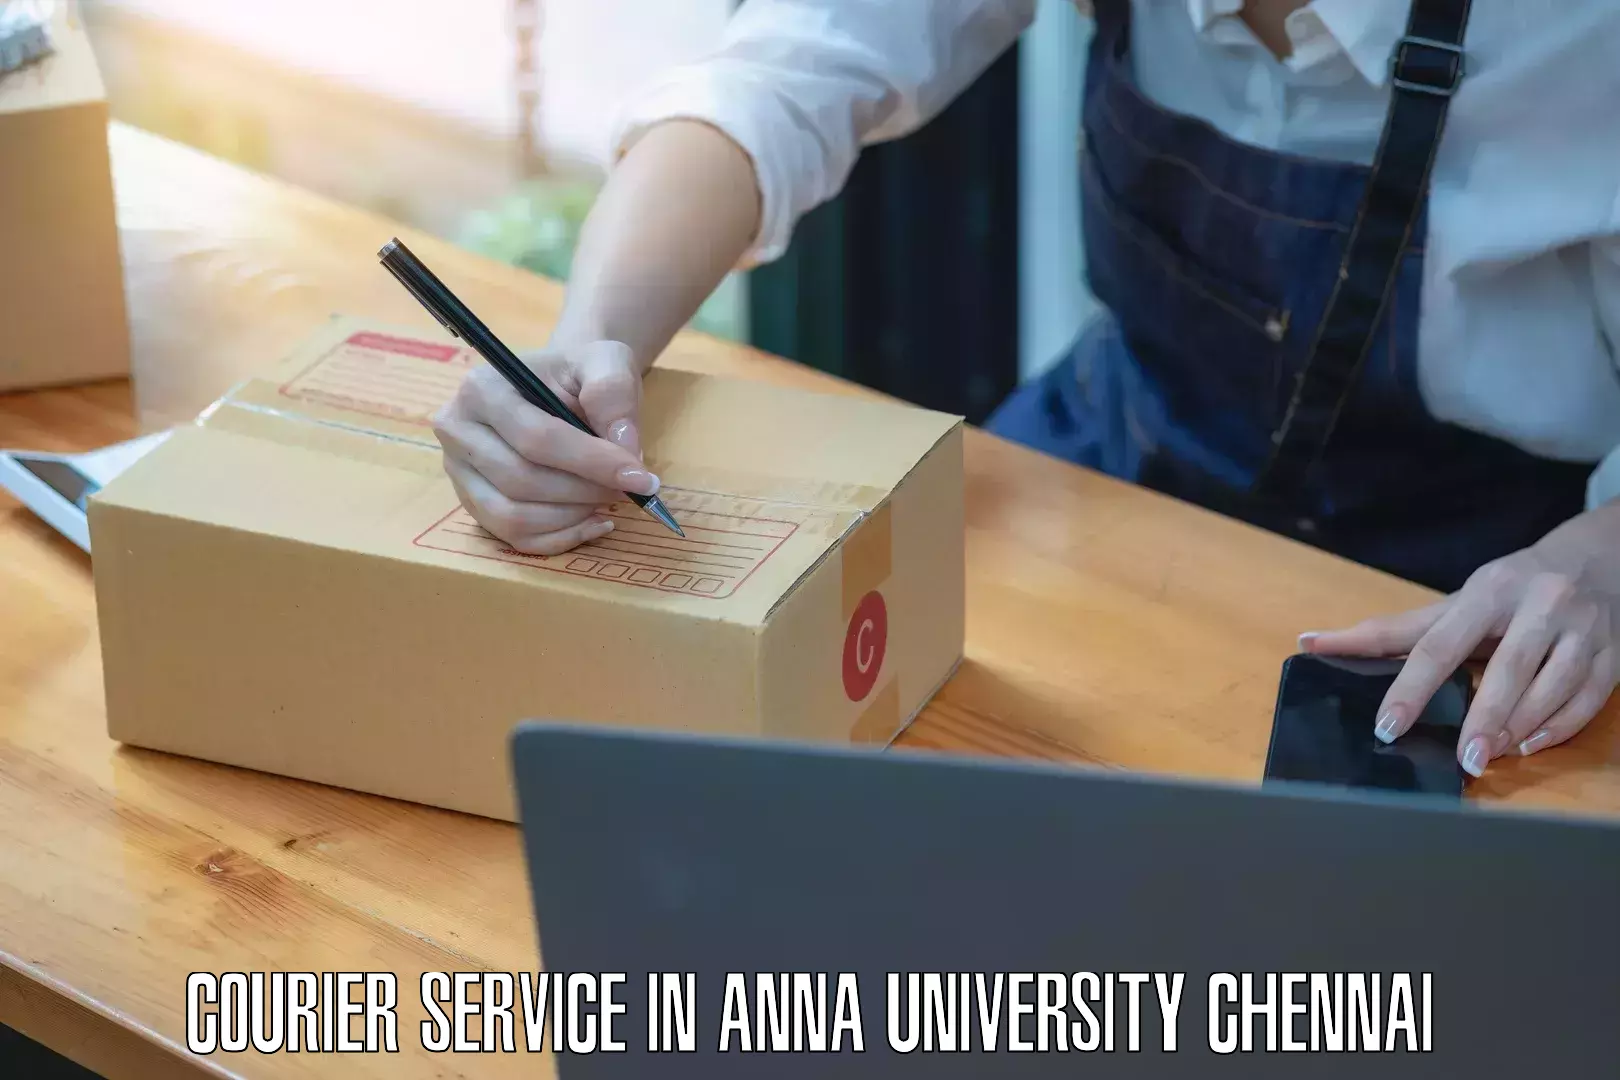 Sustainable courier practices in Anna University Chennai